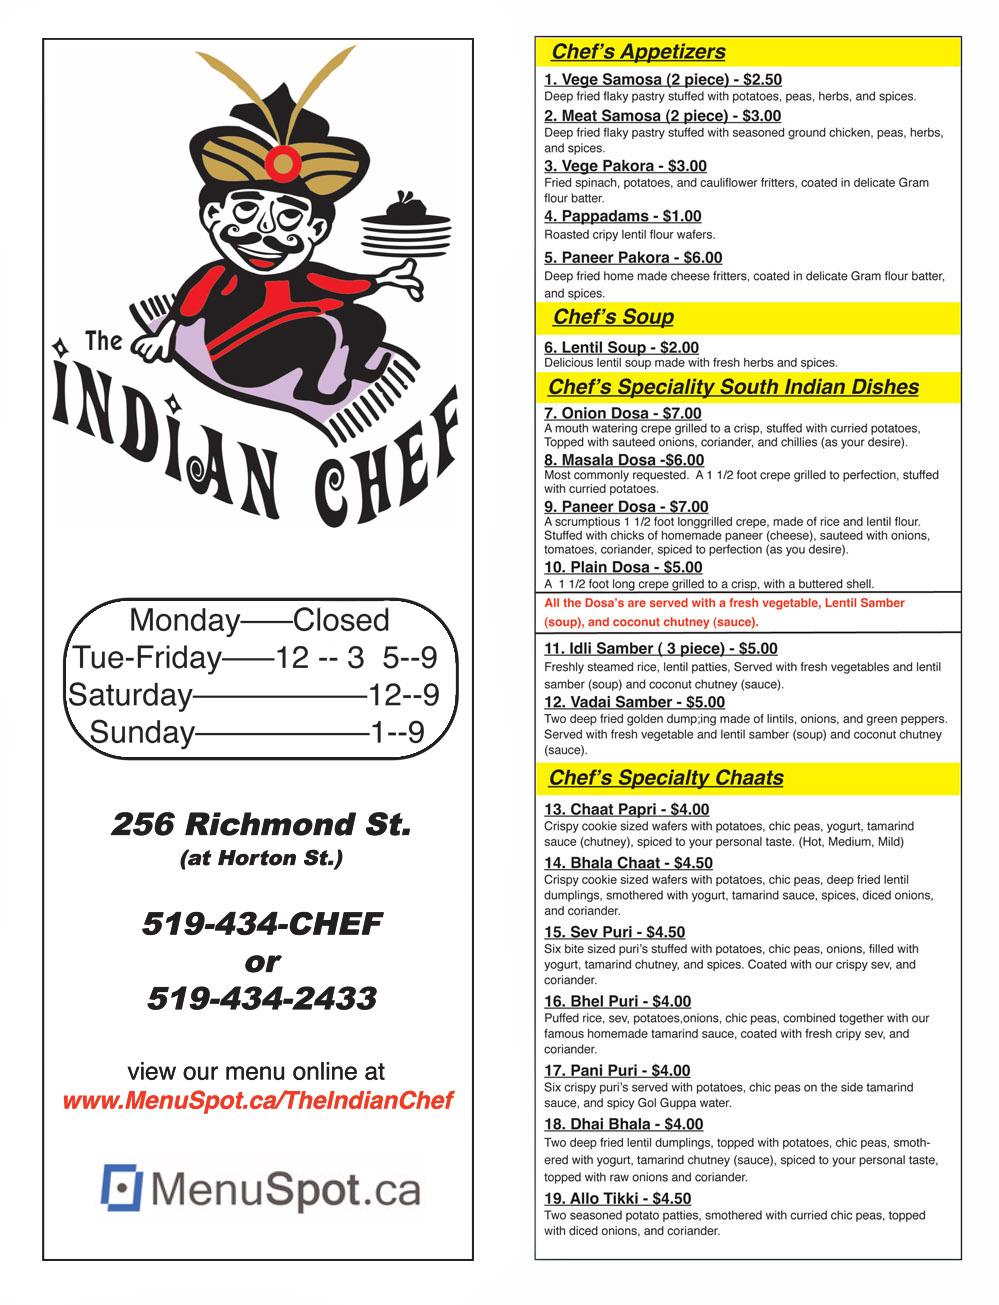 The Indian Chef Menu - Page 1!